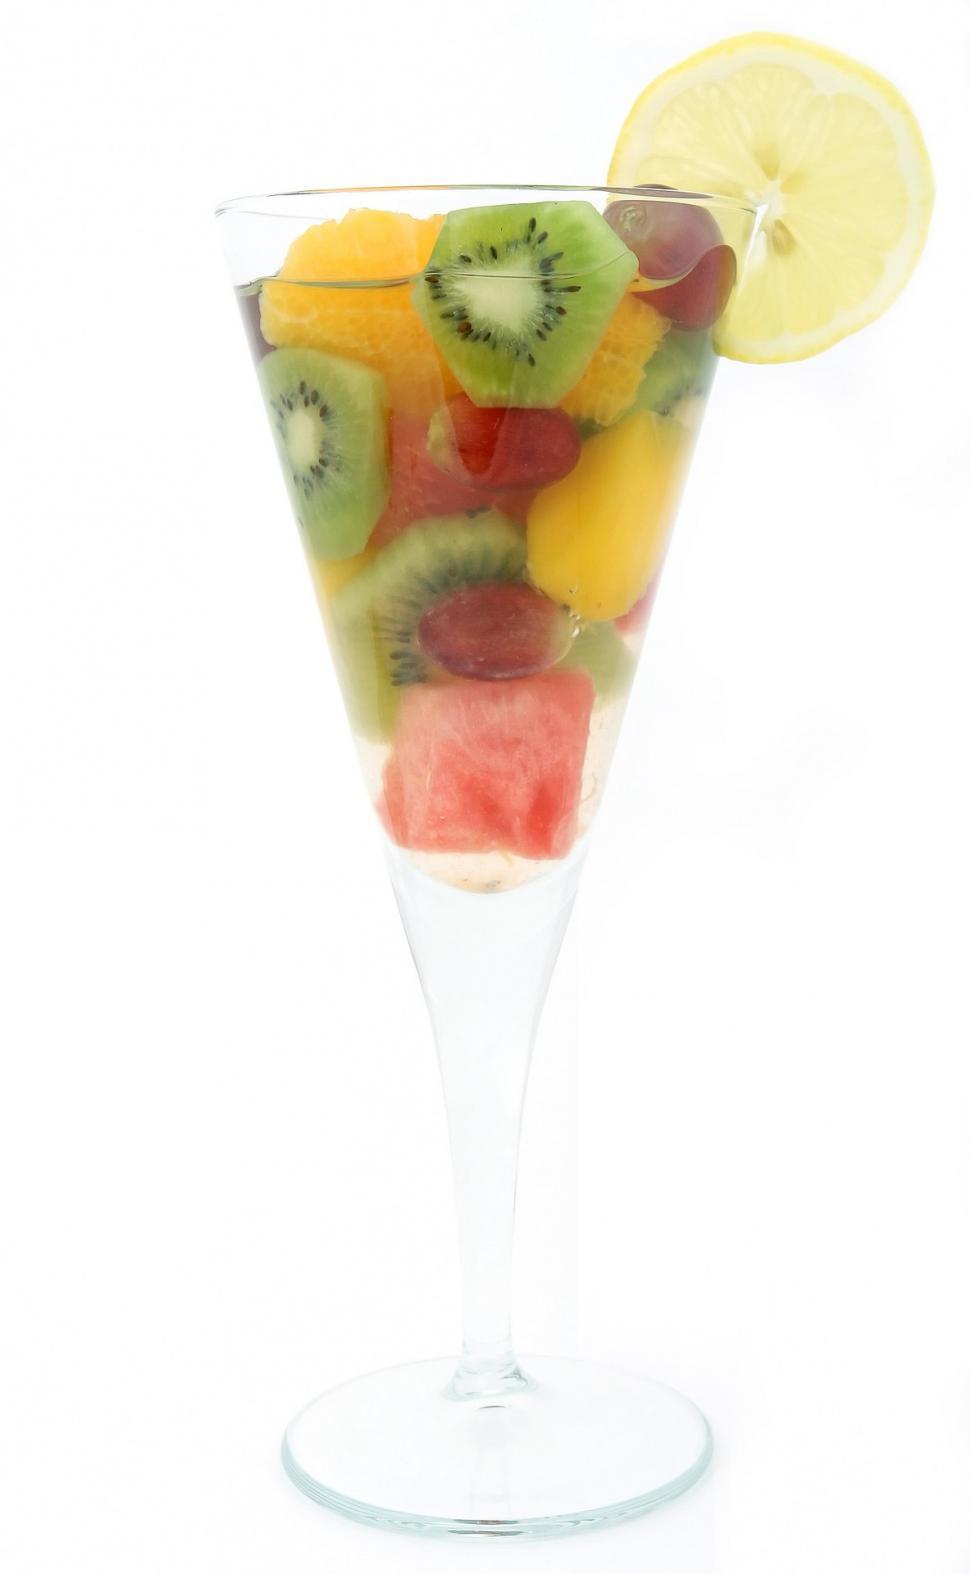 Free Image of Fruit Salad in a Martini Glass With Lemon Slice 